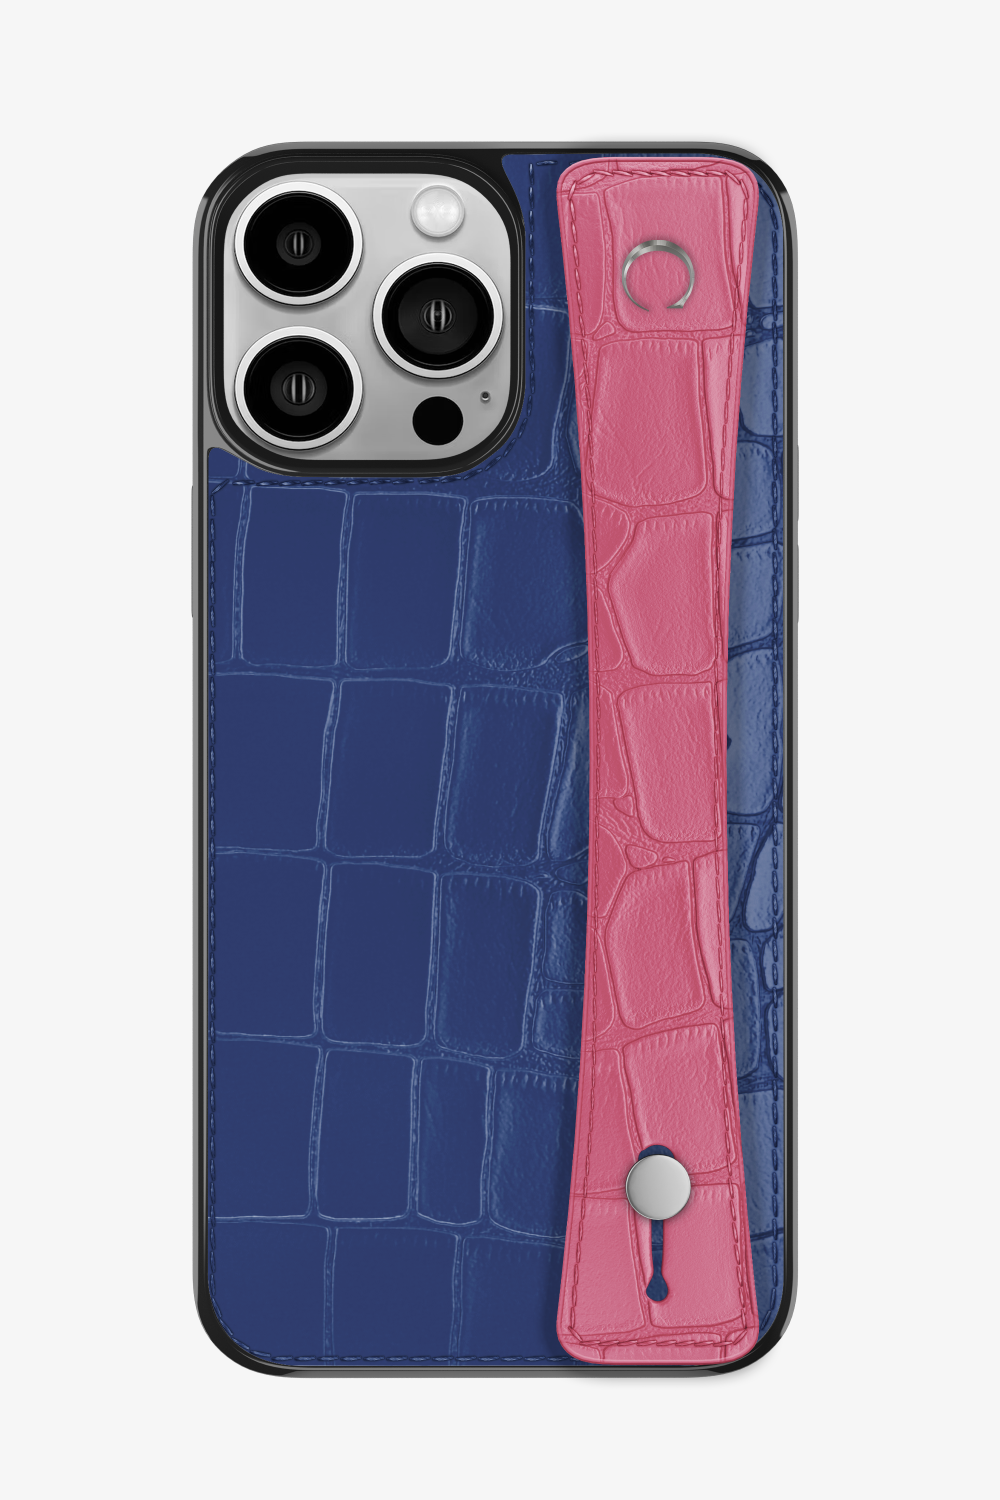 Alligator Sports Strap Case for iPhone 15 Pro Max - Navy Blue / Pink - zollofrance